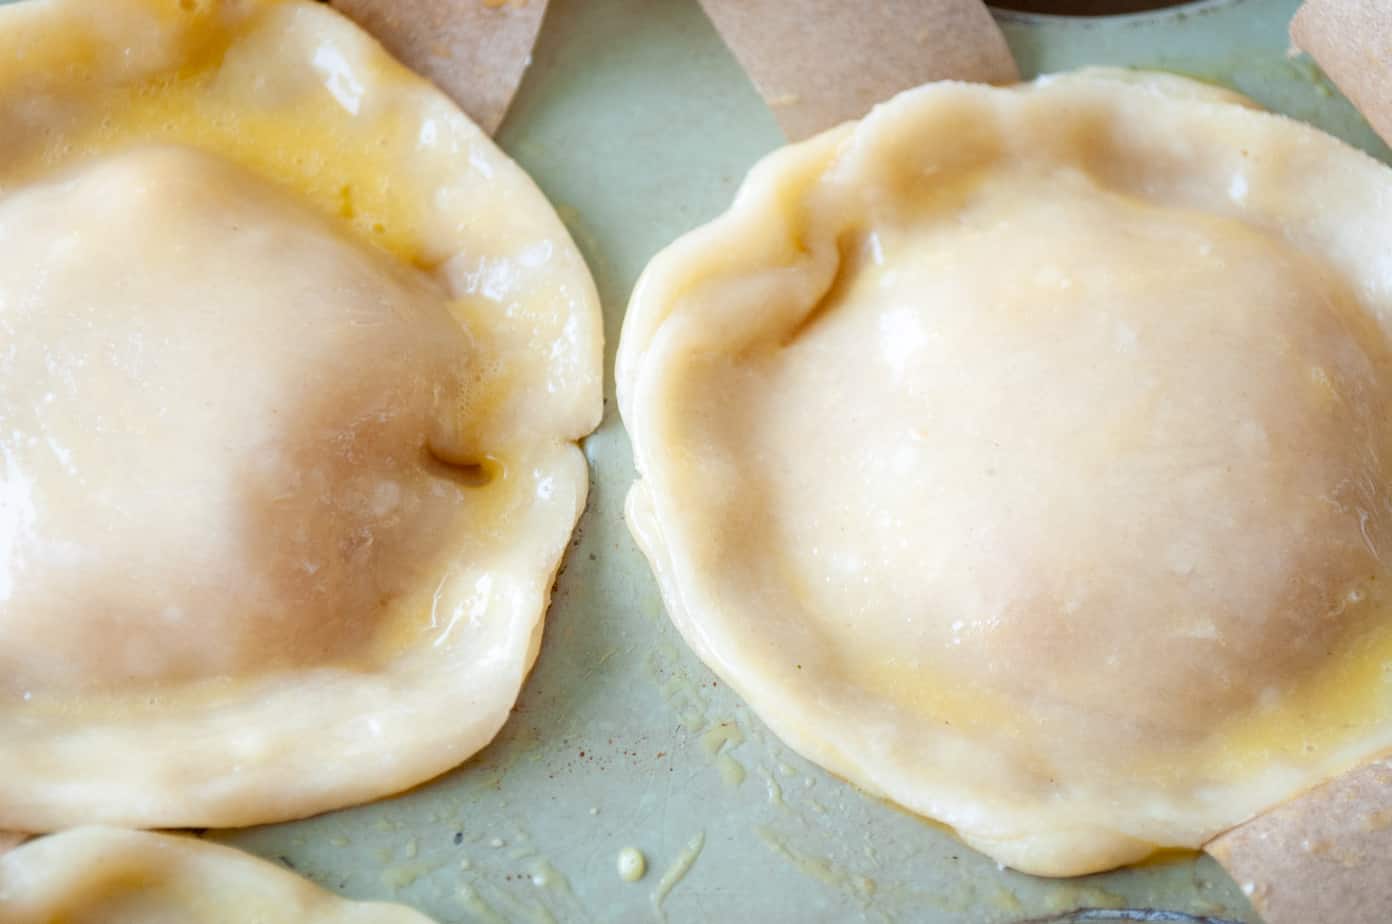 Mini pies brushed with egg wash.